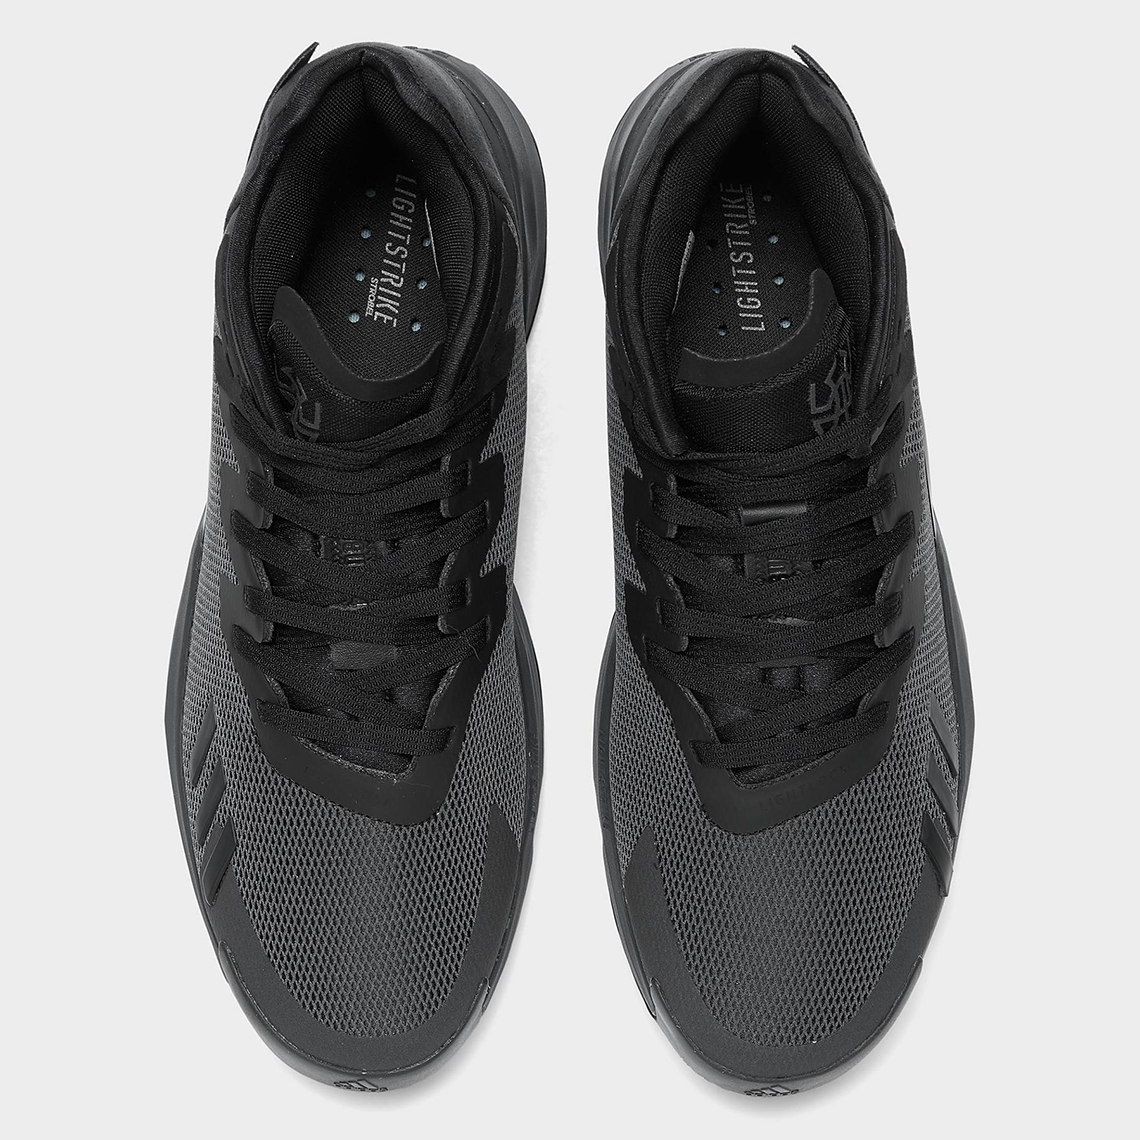 adidas don issue 4 core black GY6511 5